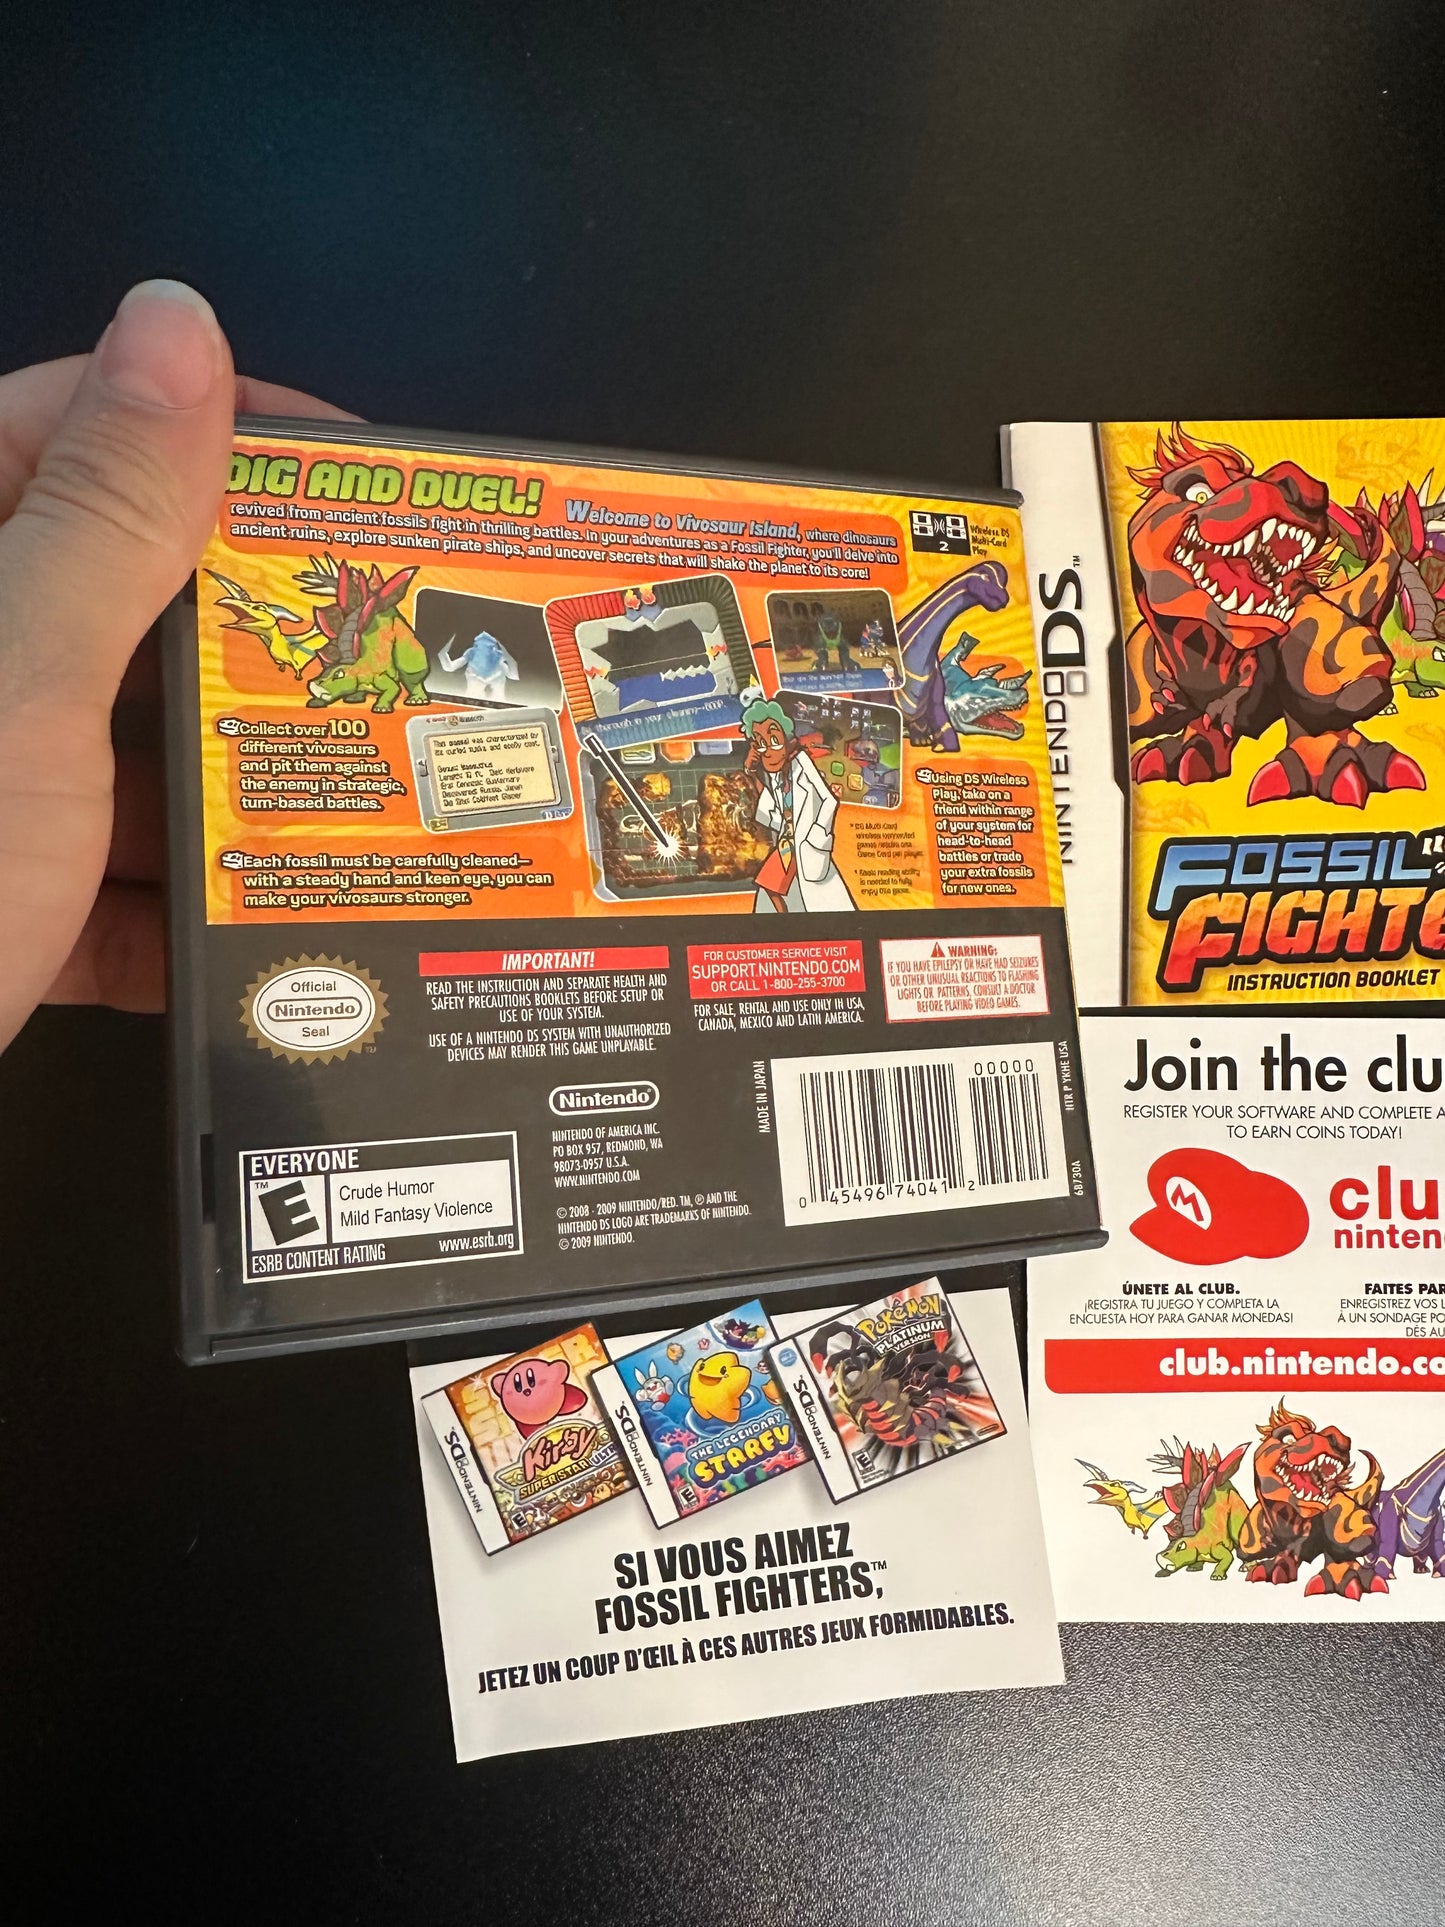 Fossil Fighters Nintendo DS Case and Manual Only